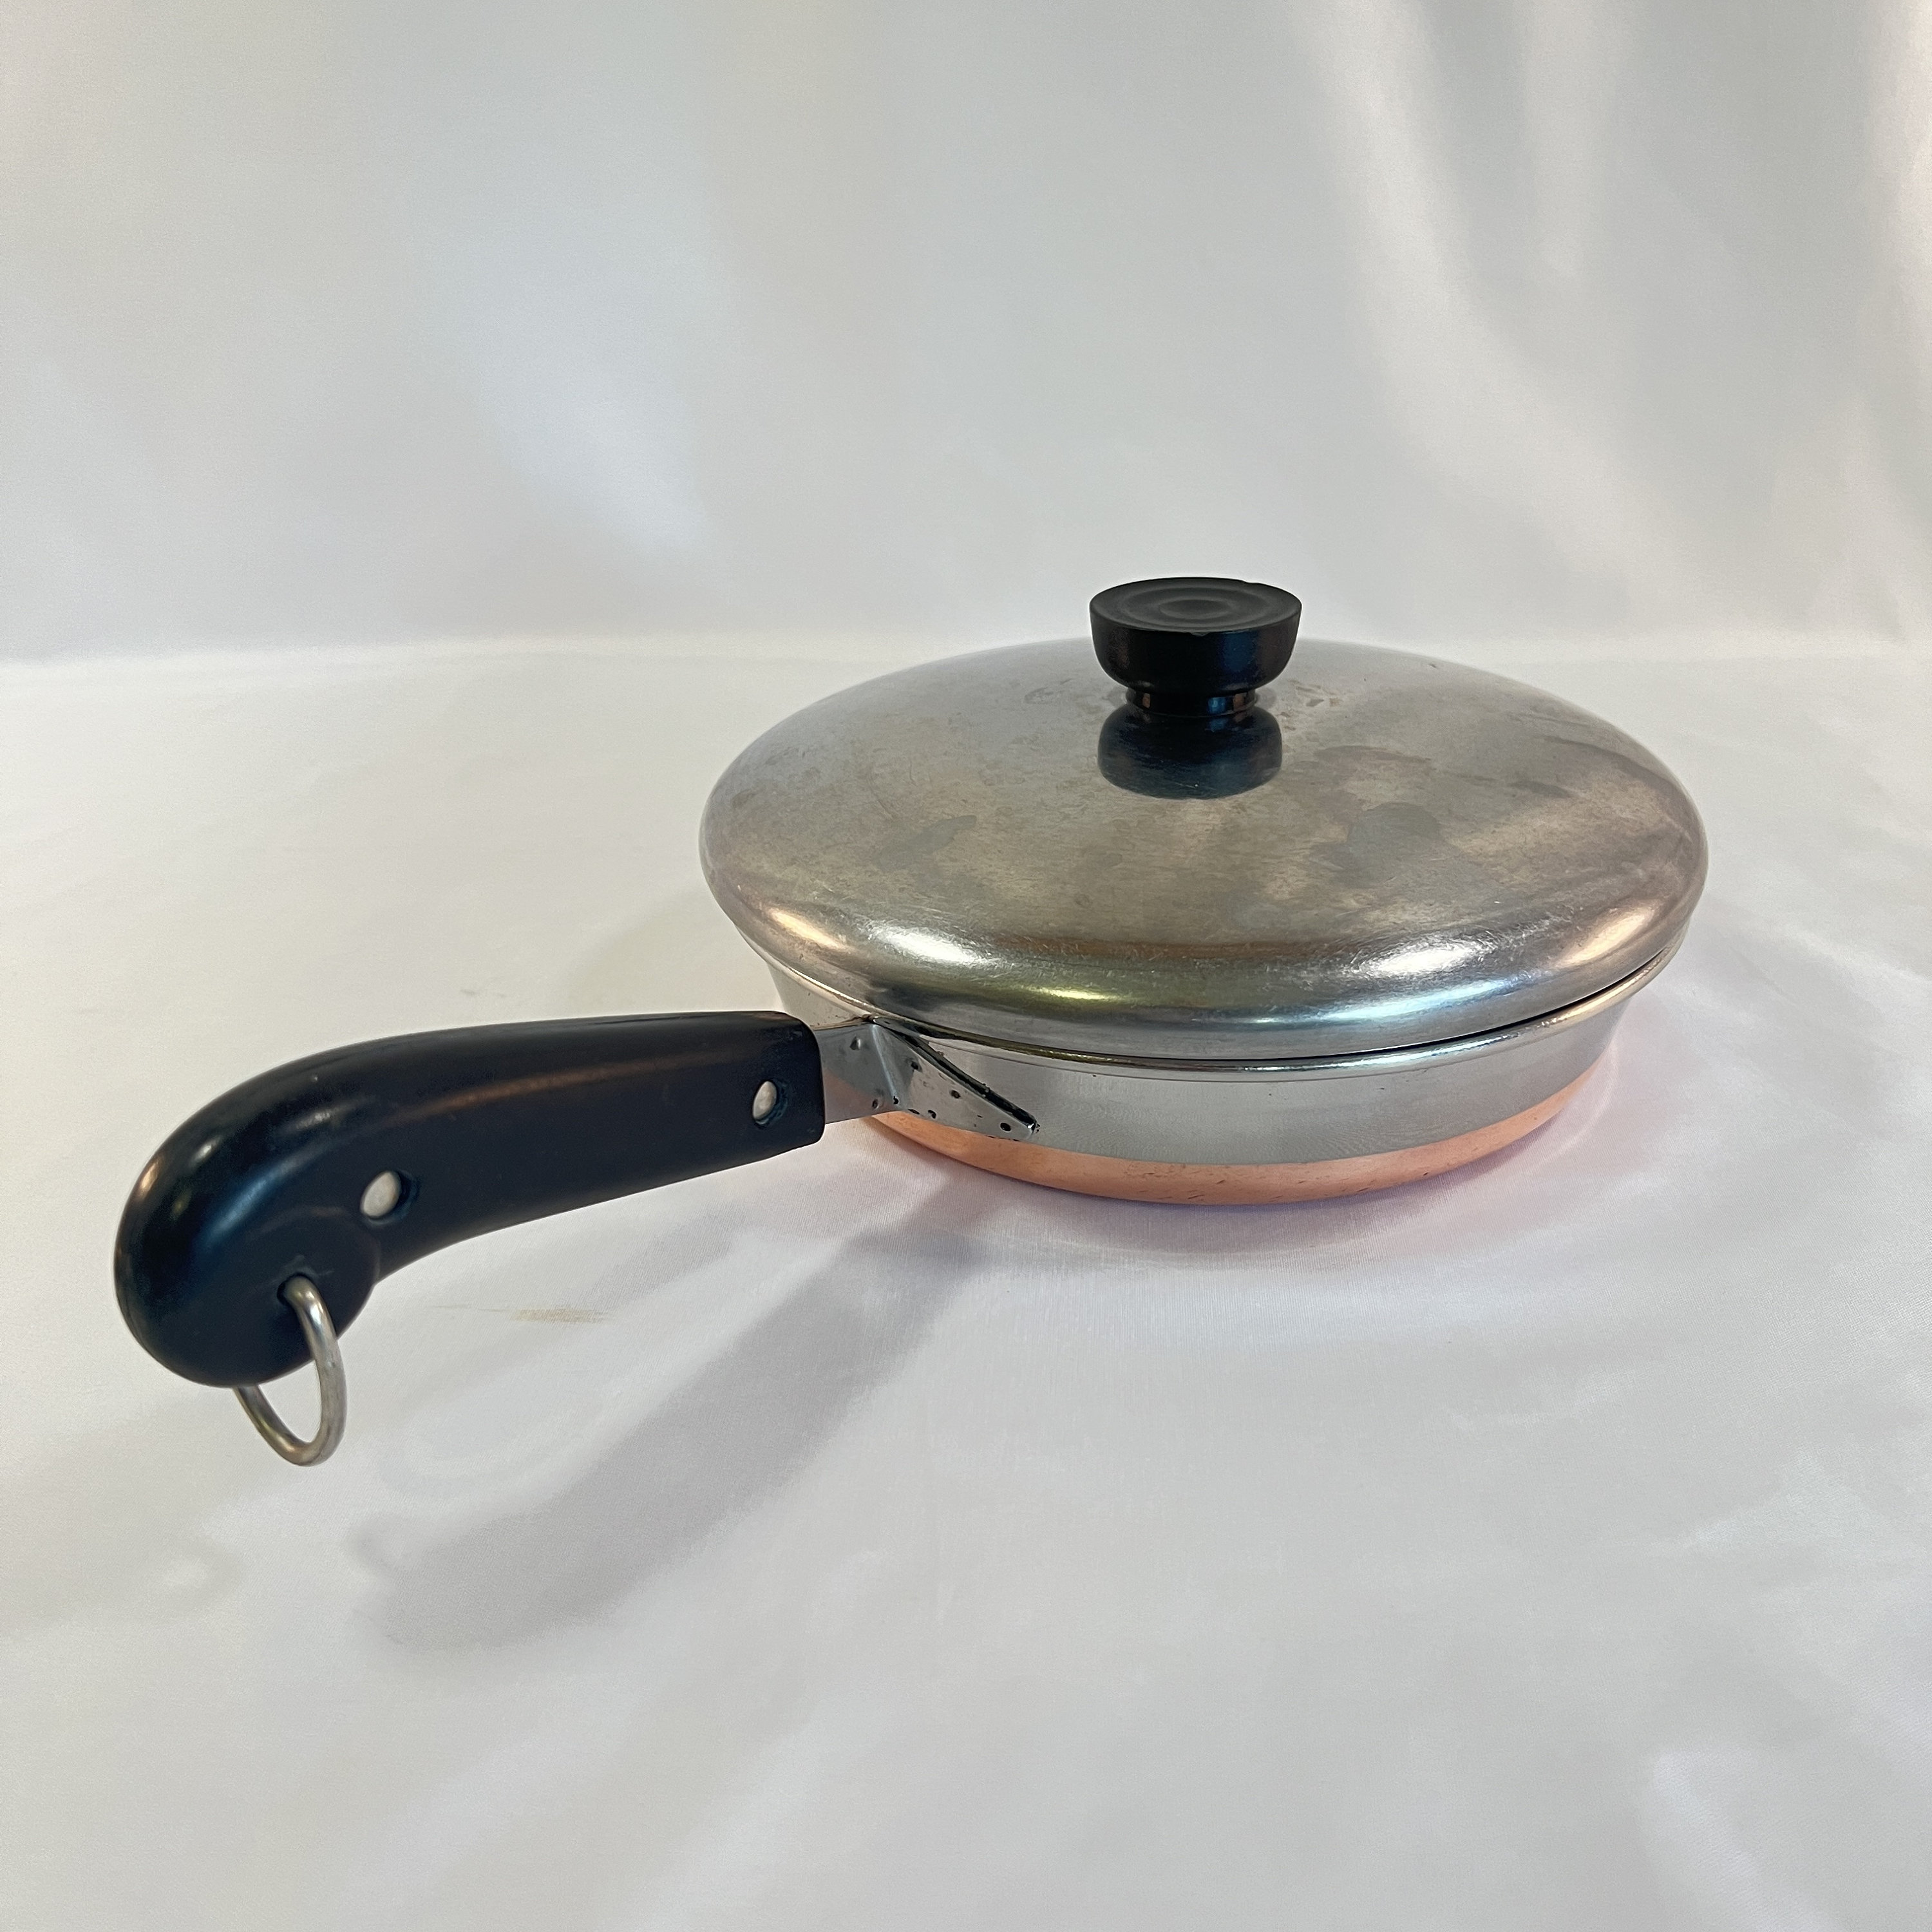 vintage copper bottom Revere Ware sauce pans, tiny one cup toy kitchen size  working cookware